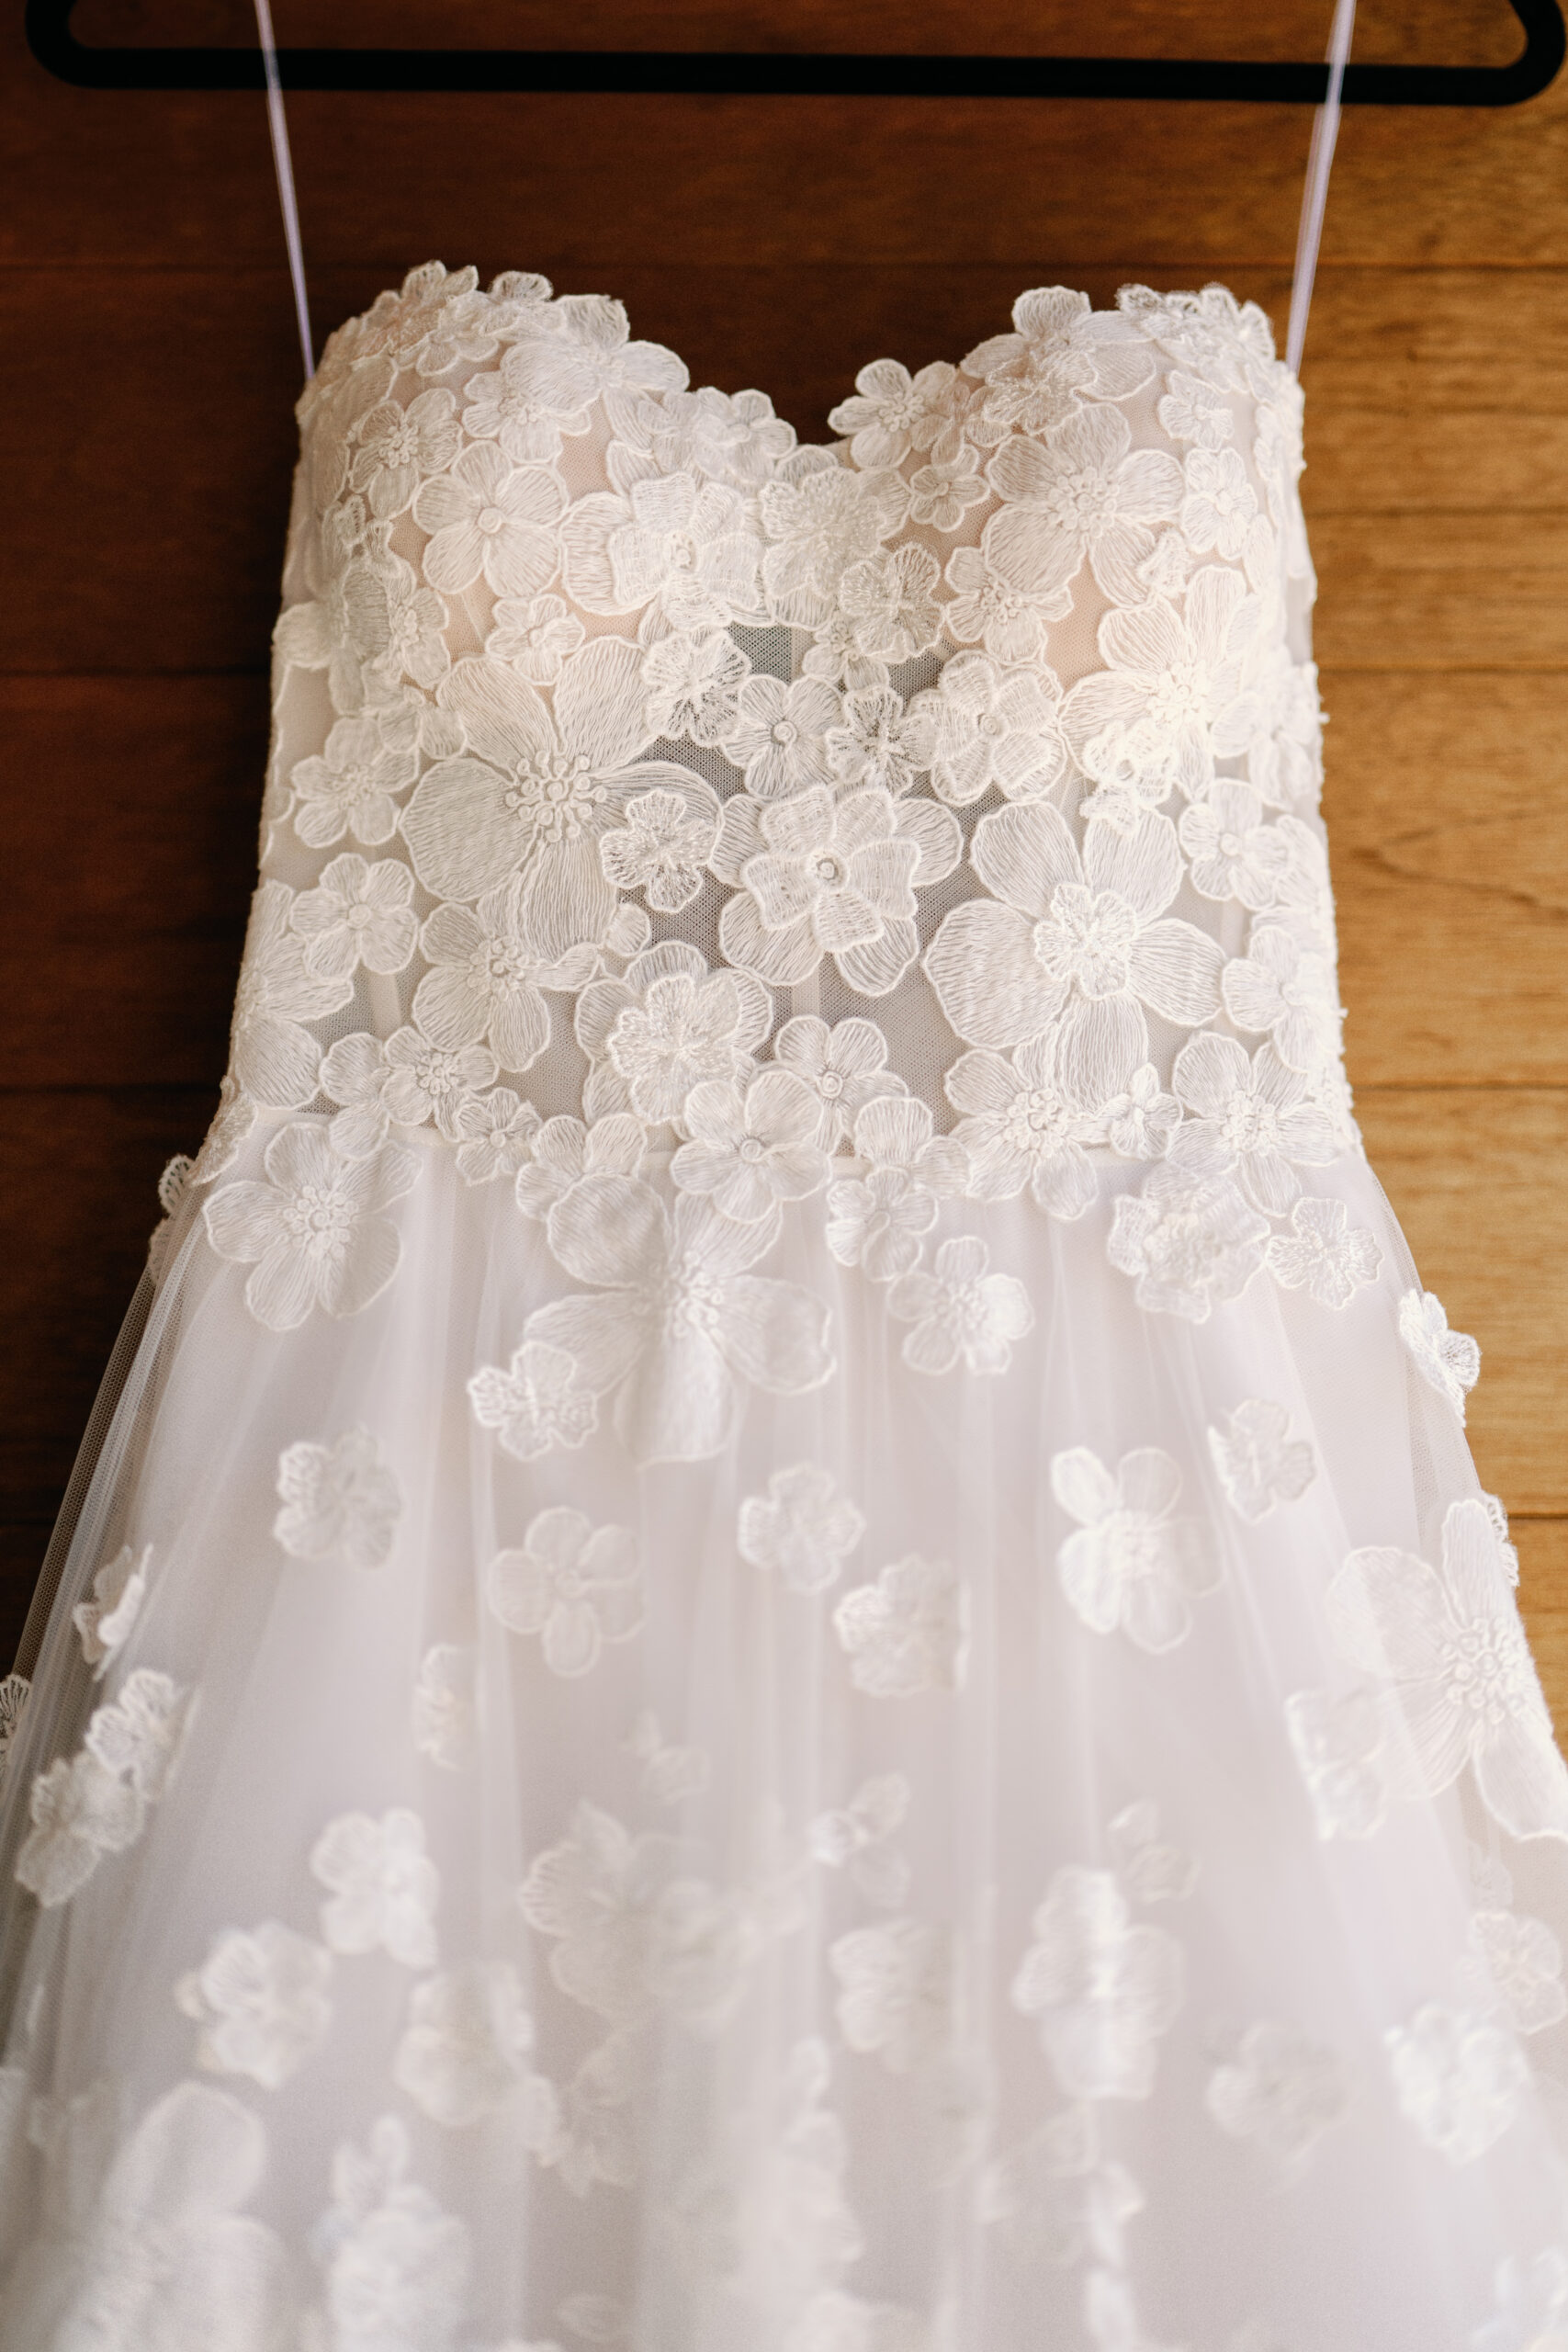 Wedding dress with floral appliques